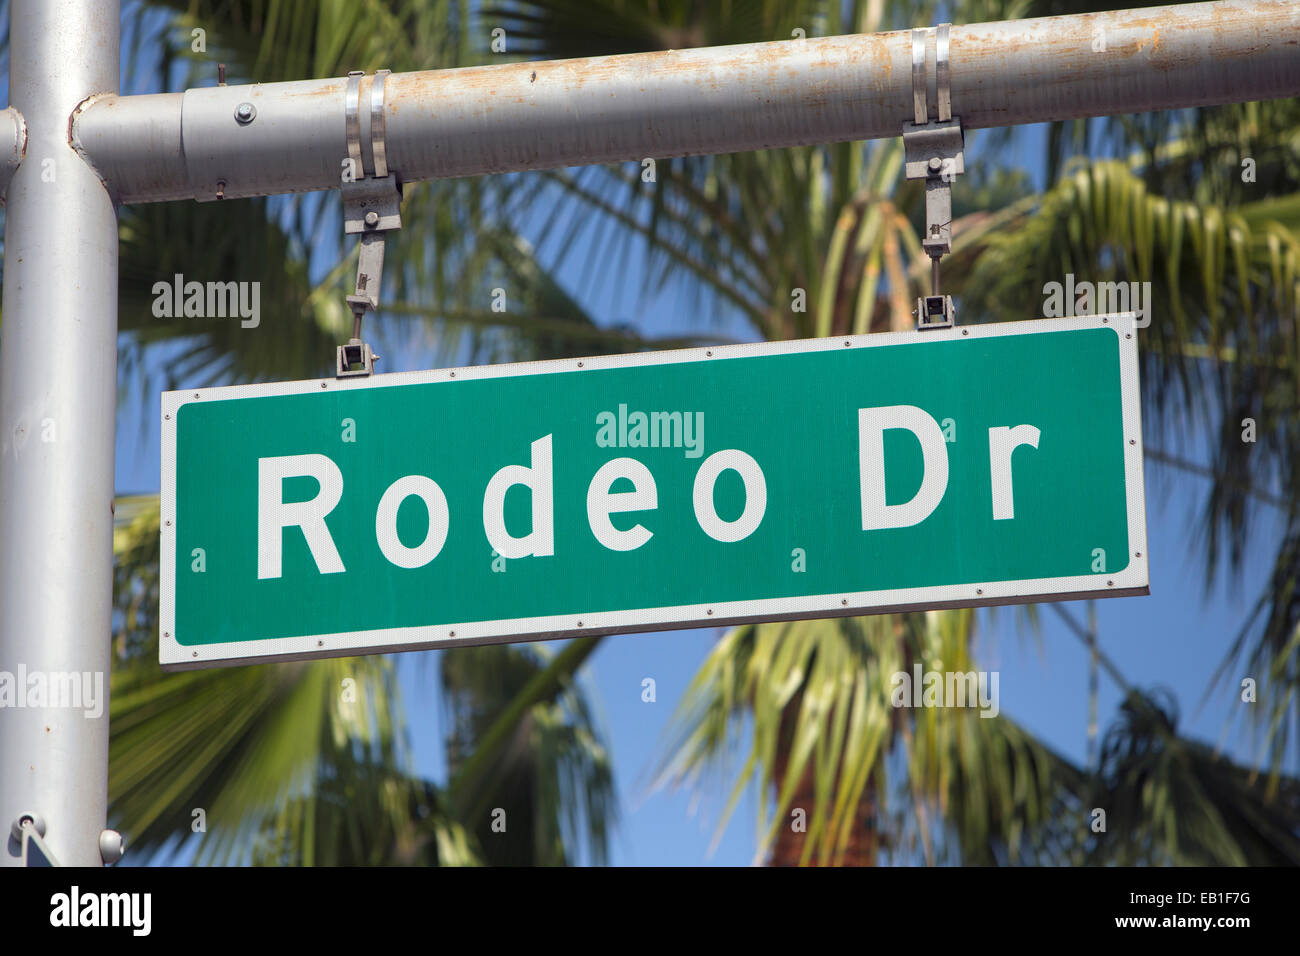 Rodeo Drive Street Sign, Ornate Signage, Beverly Hills by Wernher Krutein